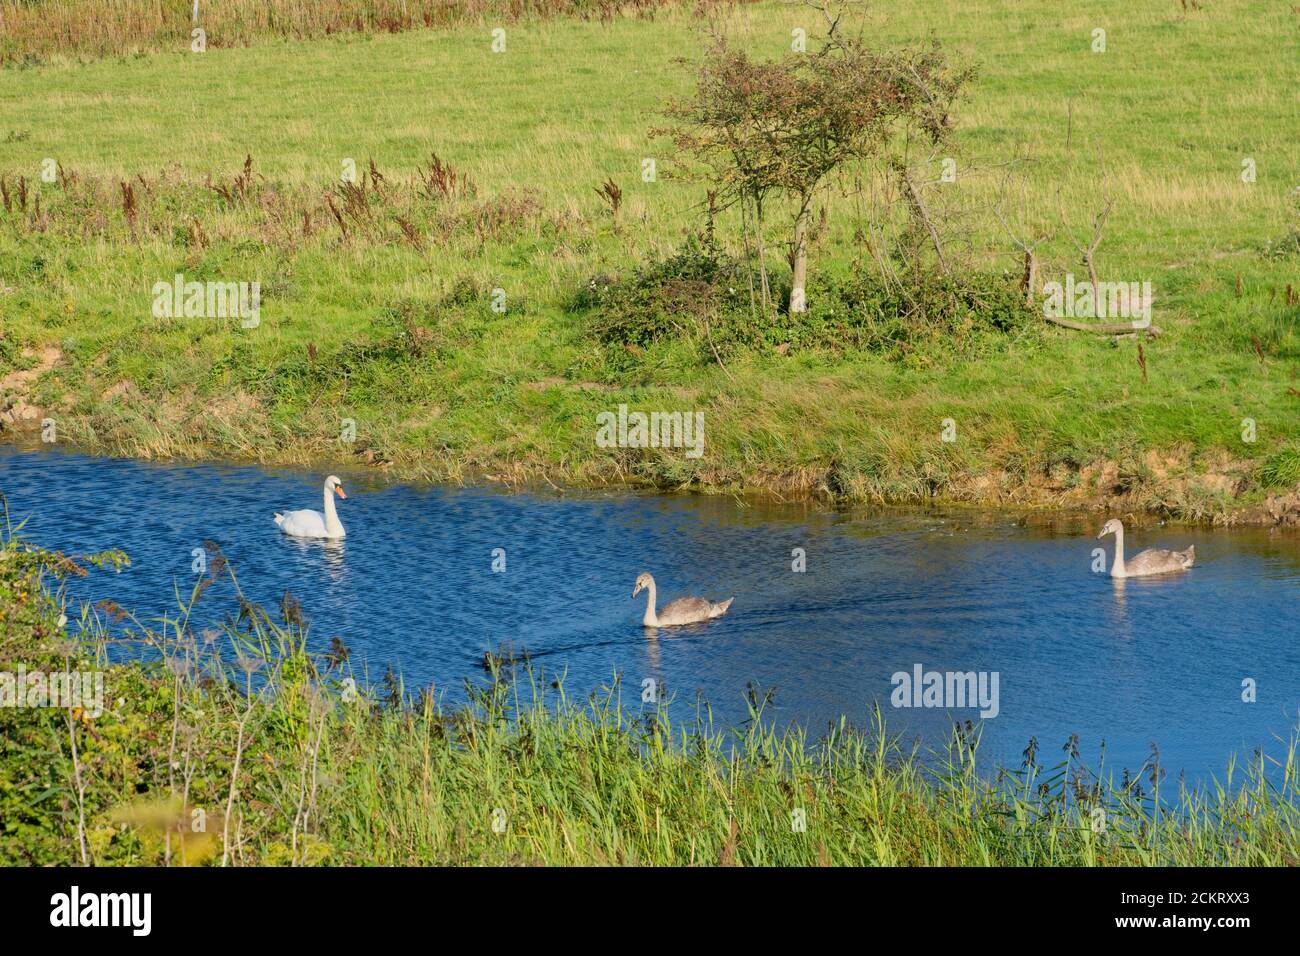 Adult parent Mute swan with juveniles swimming in natural water source. Grassy foreground and background. Landscape format. Stock Photo